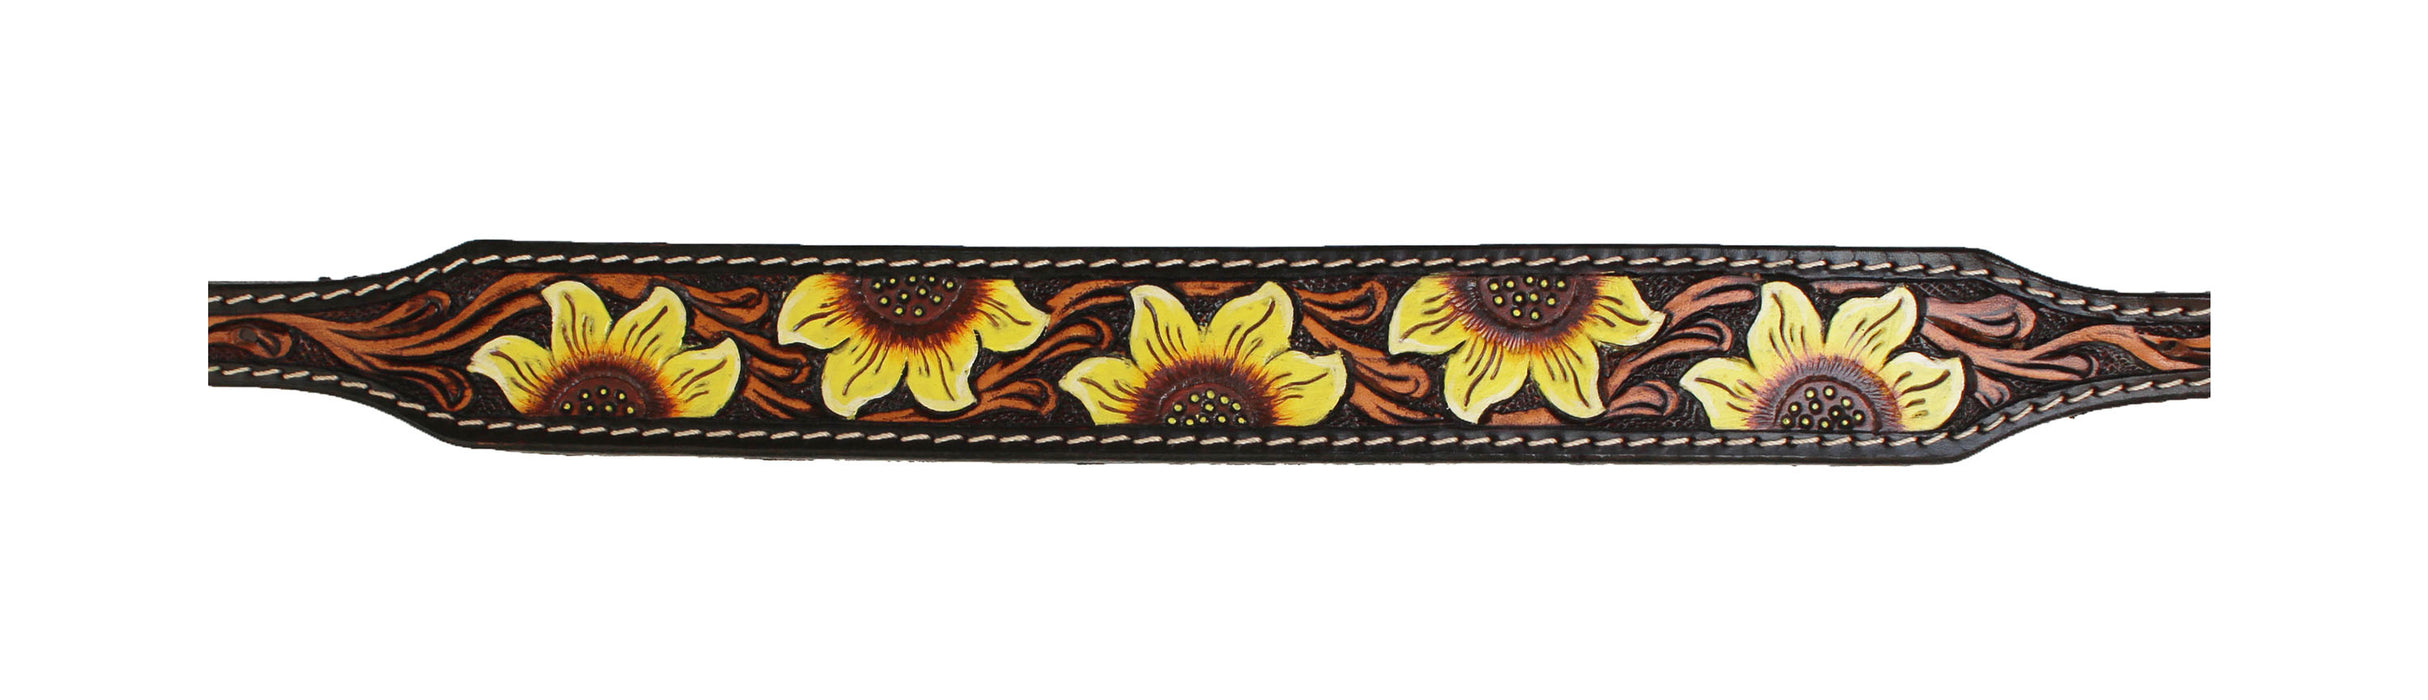 Challenger Western Tack Sunflower Tooled Leather Wither Breast Collar Strap 105HR14